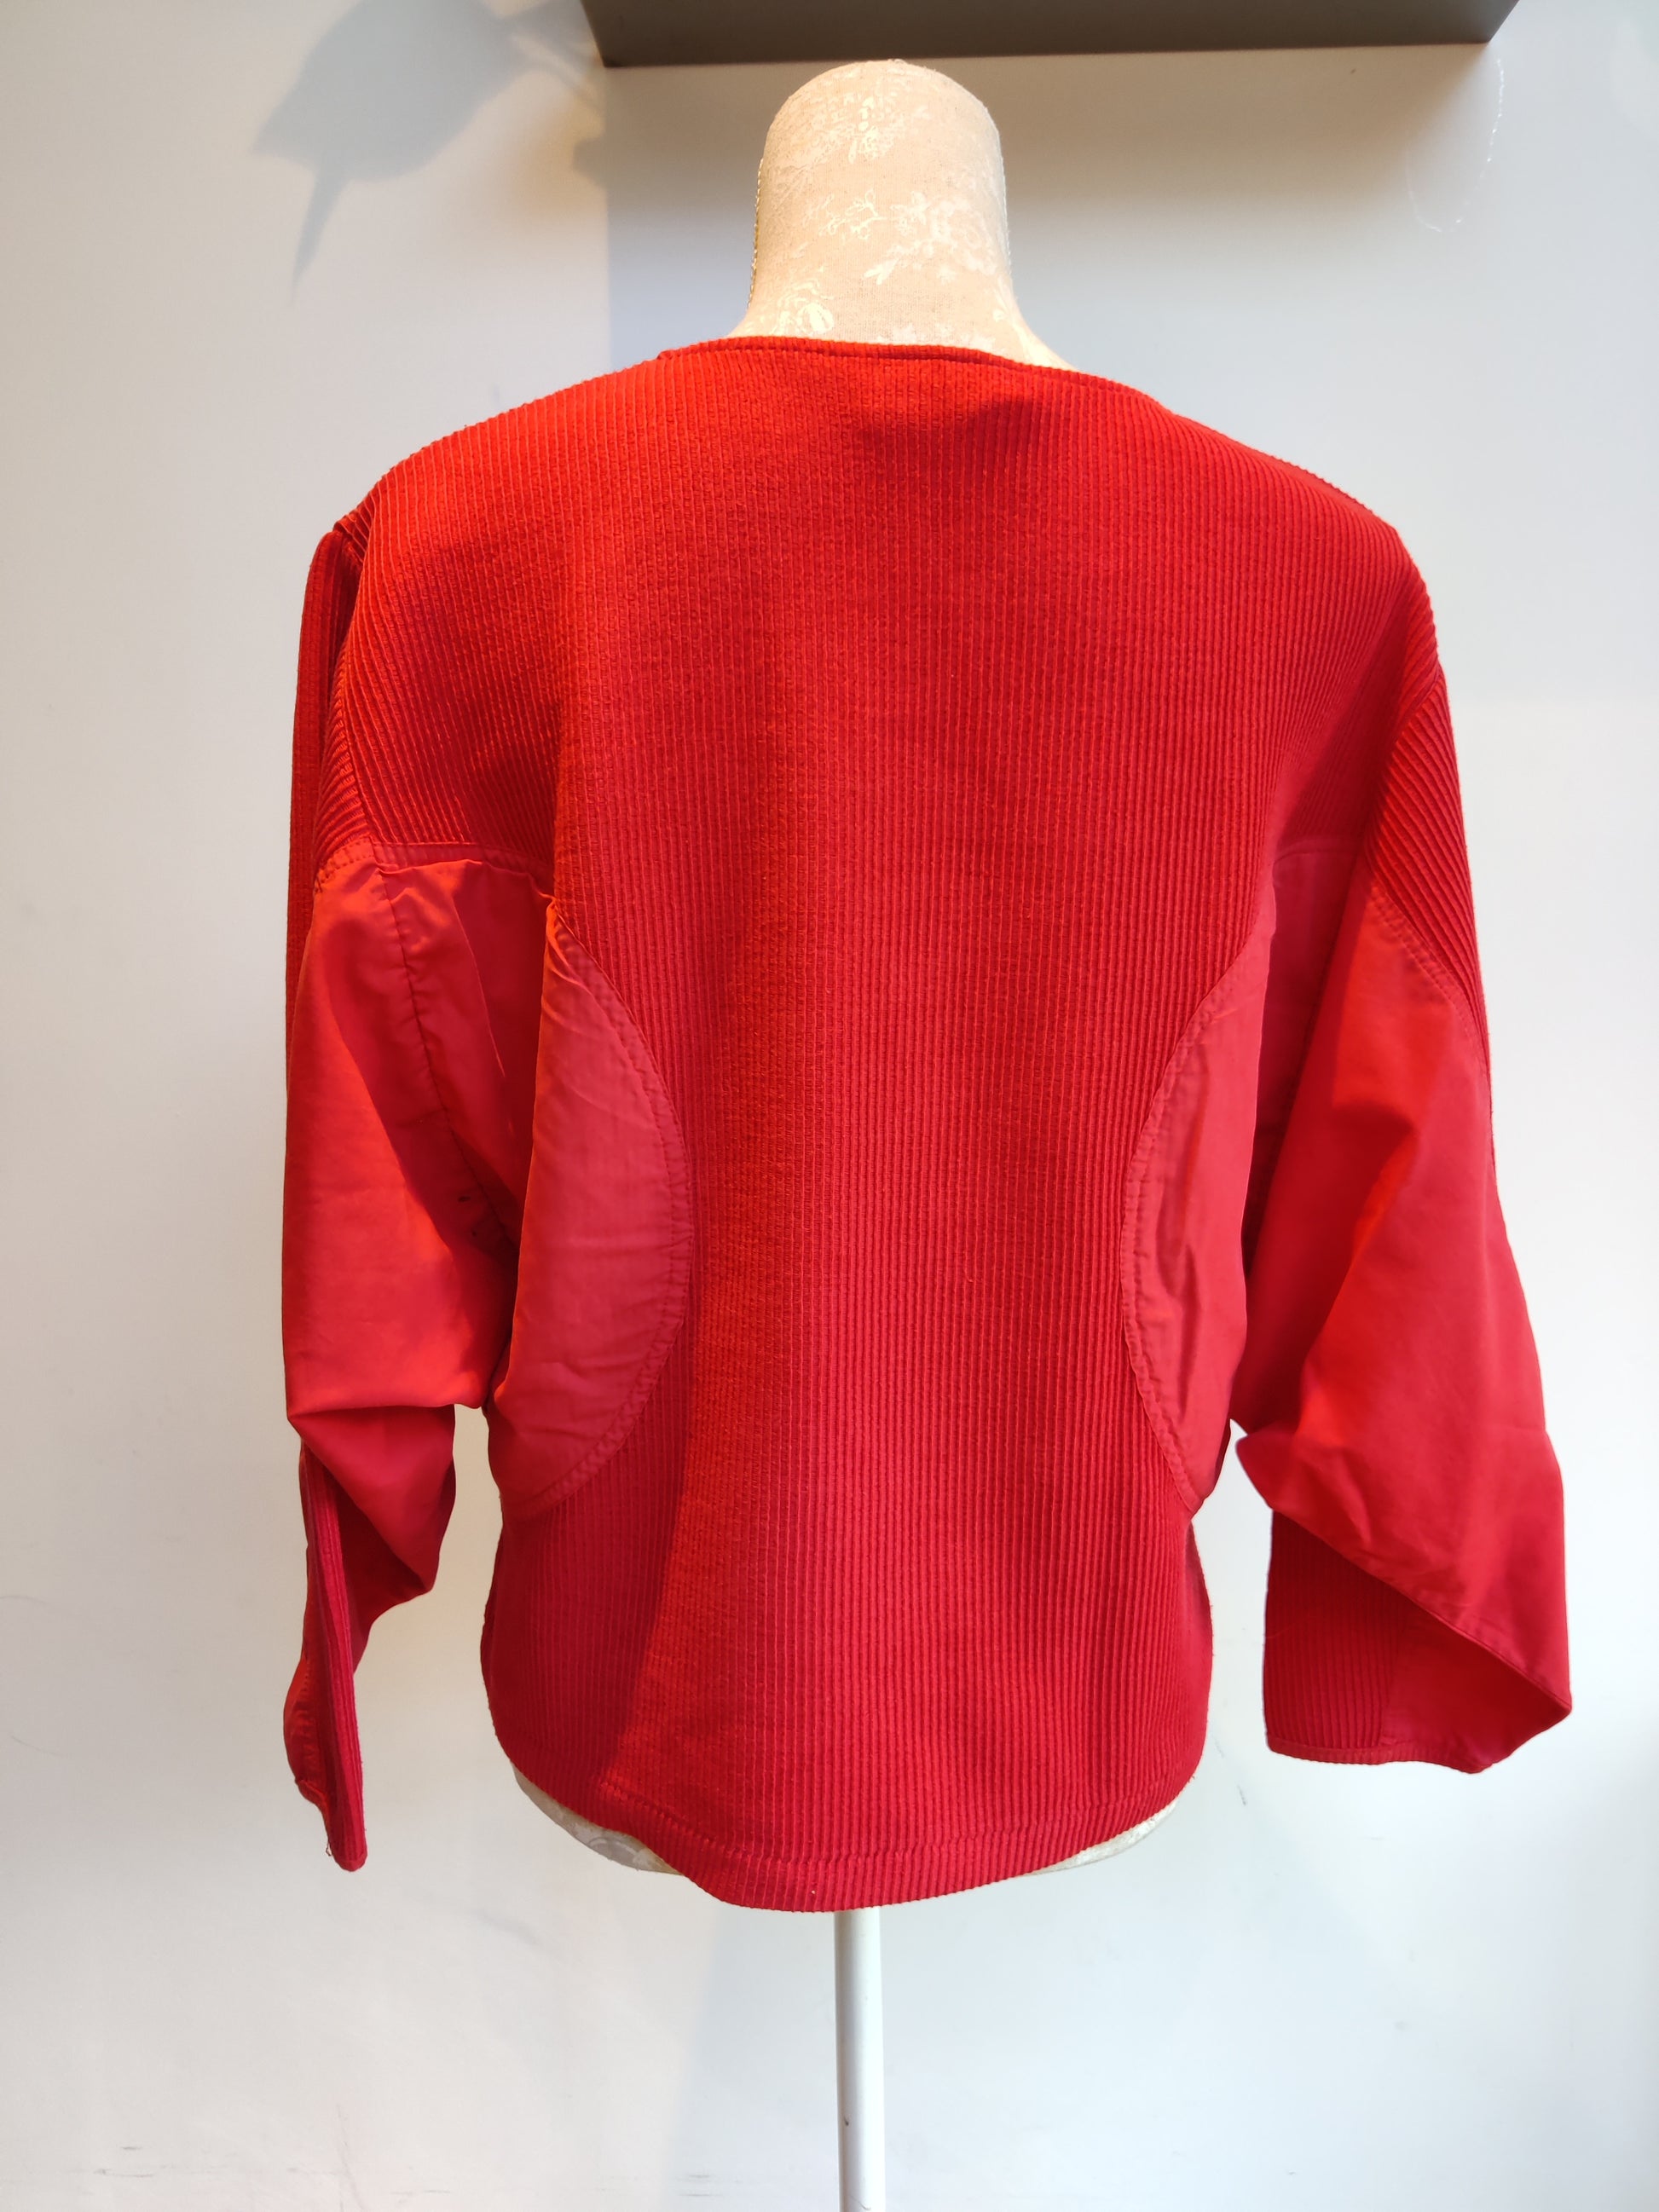 Ribbed vintage top with batwing sleeves and pockets